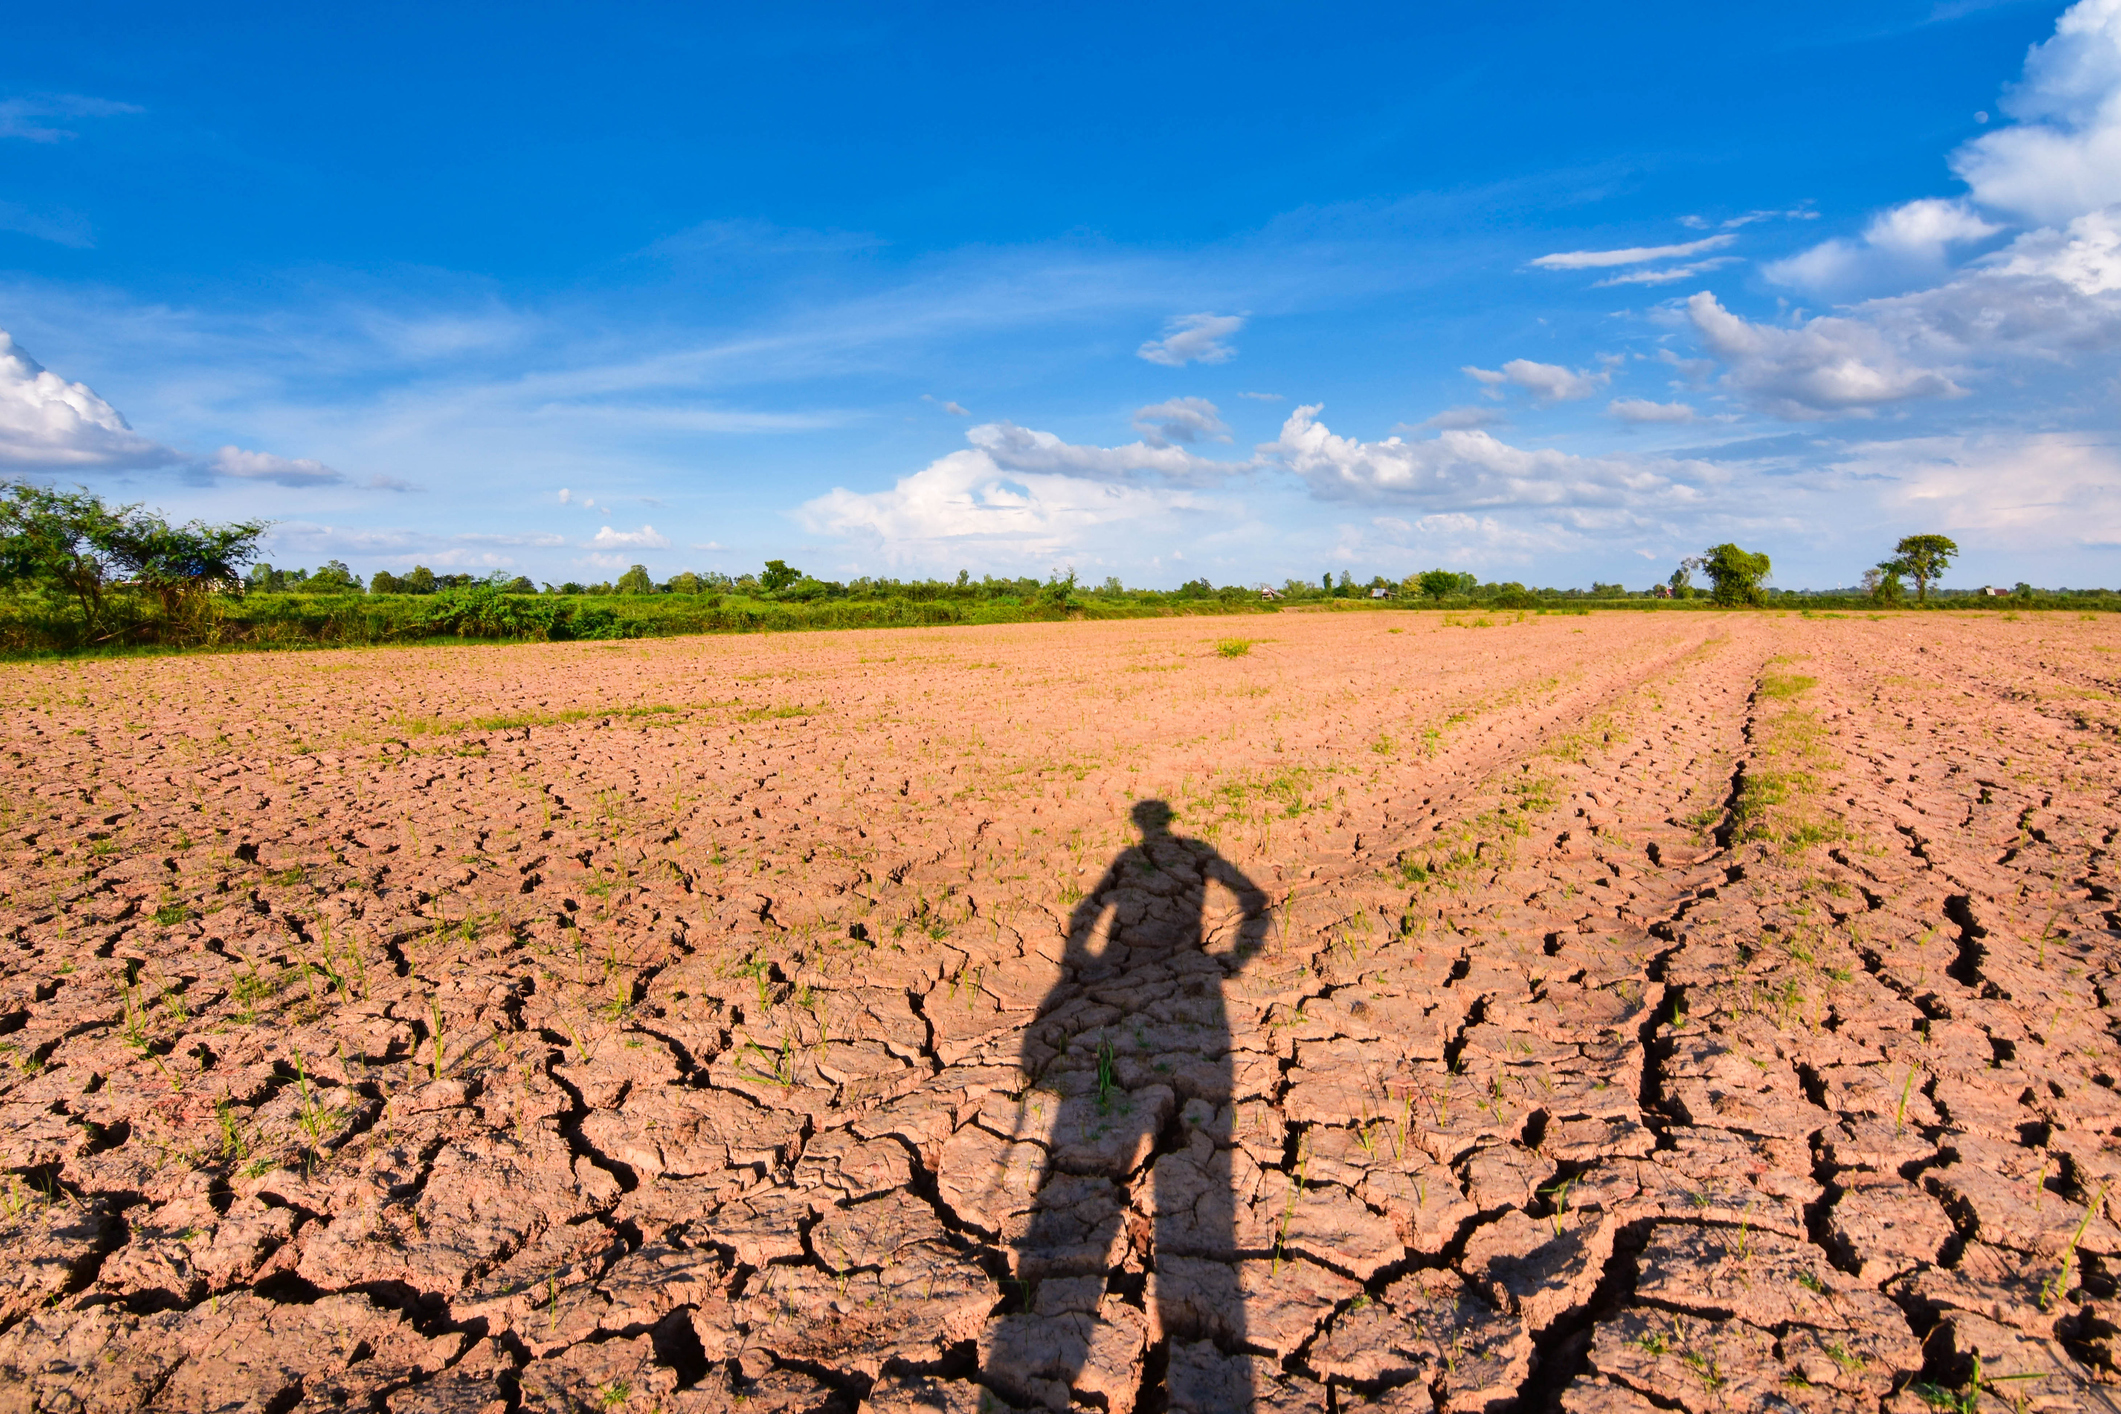 Farmers shadow on a field affected by drought